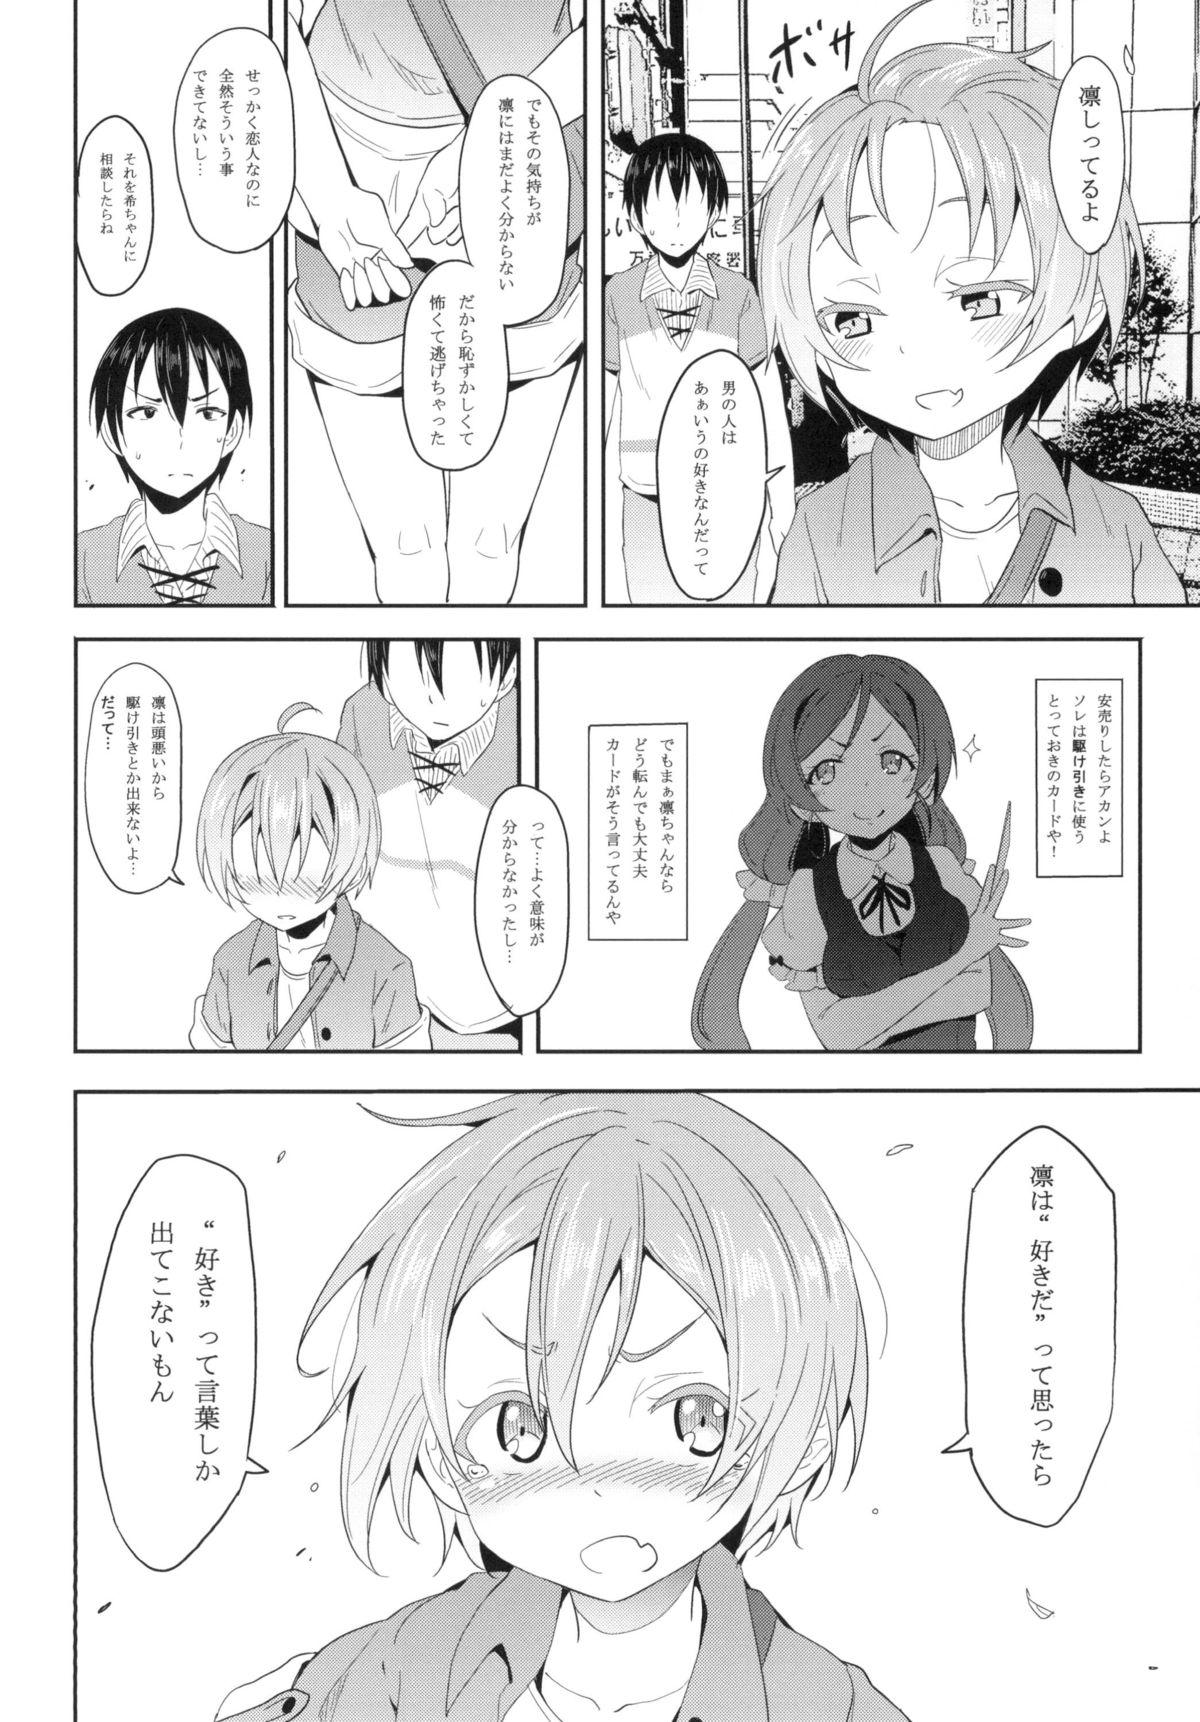 Publico Rin-chan to Issho. - Love live Gay Shaved - Page 6